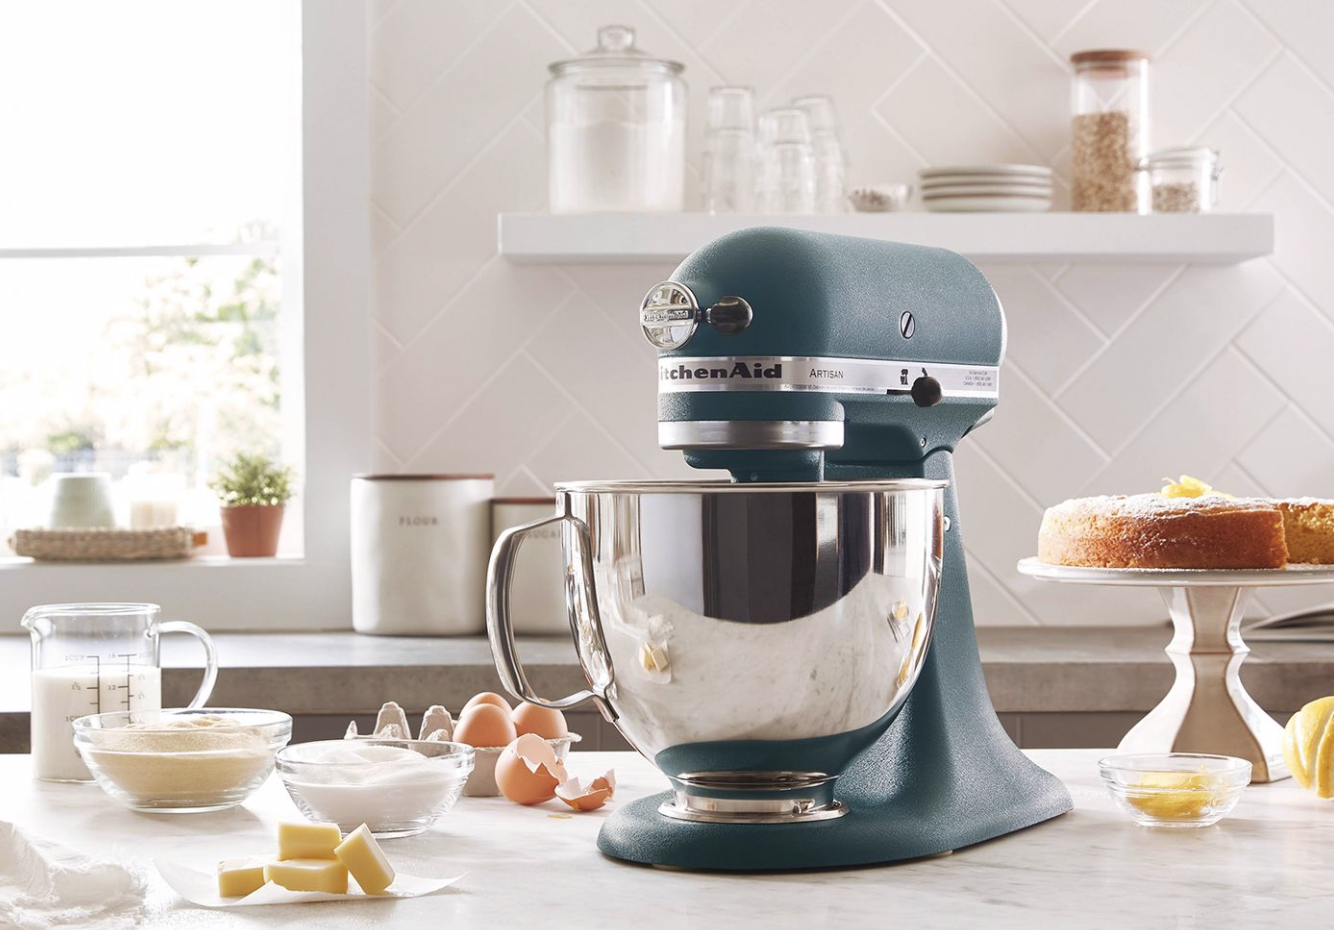 Watch How KitchenAid Makes Its Iconic Stand Mixer